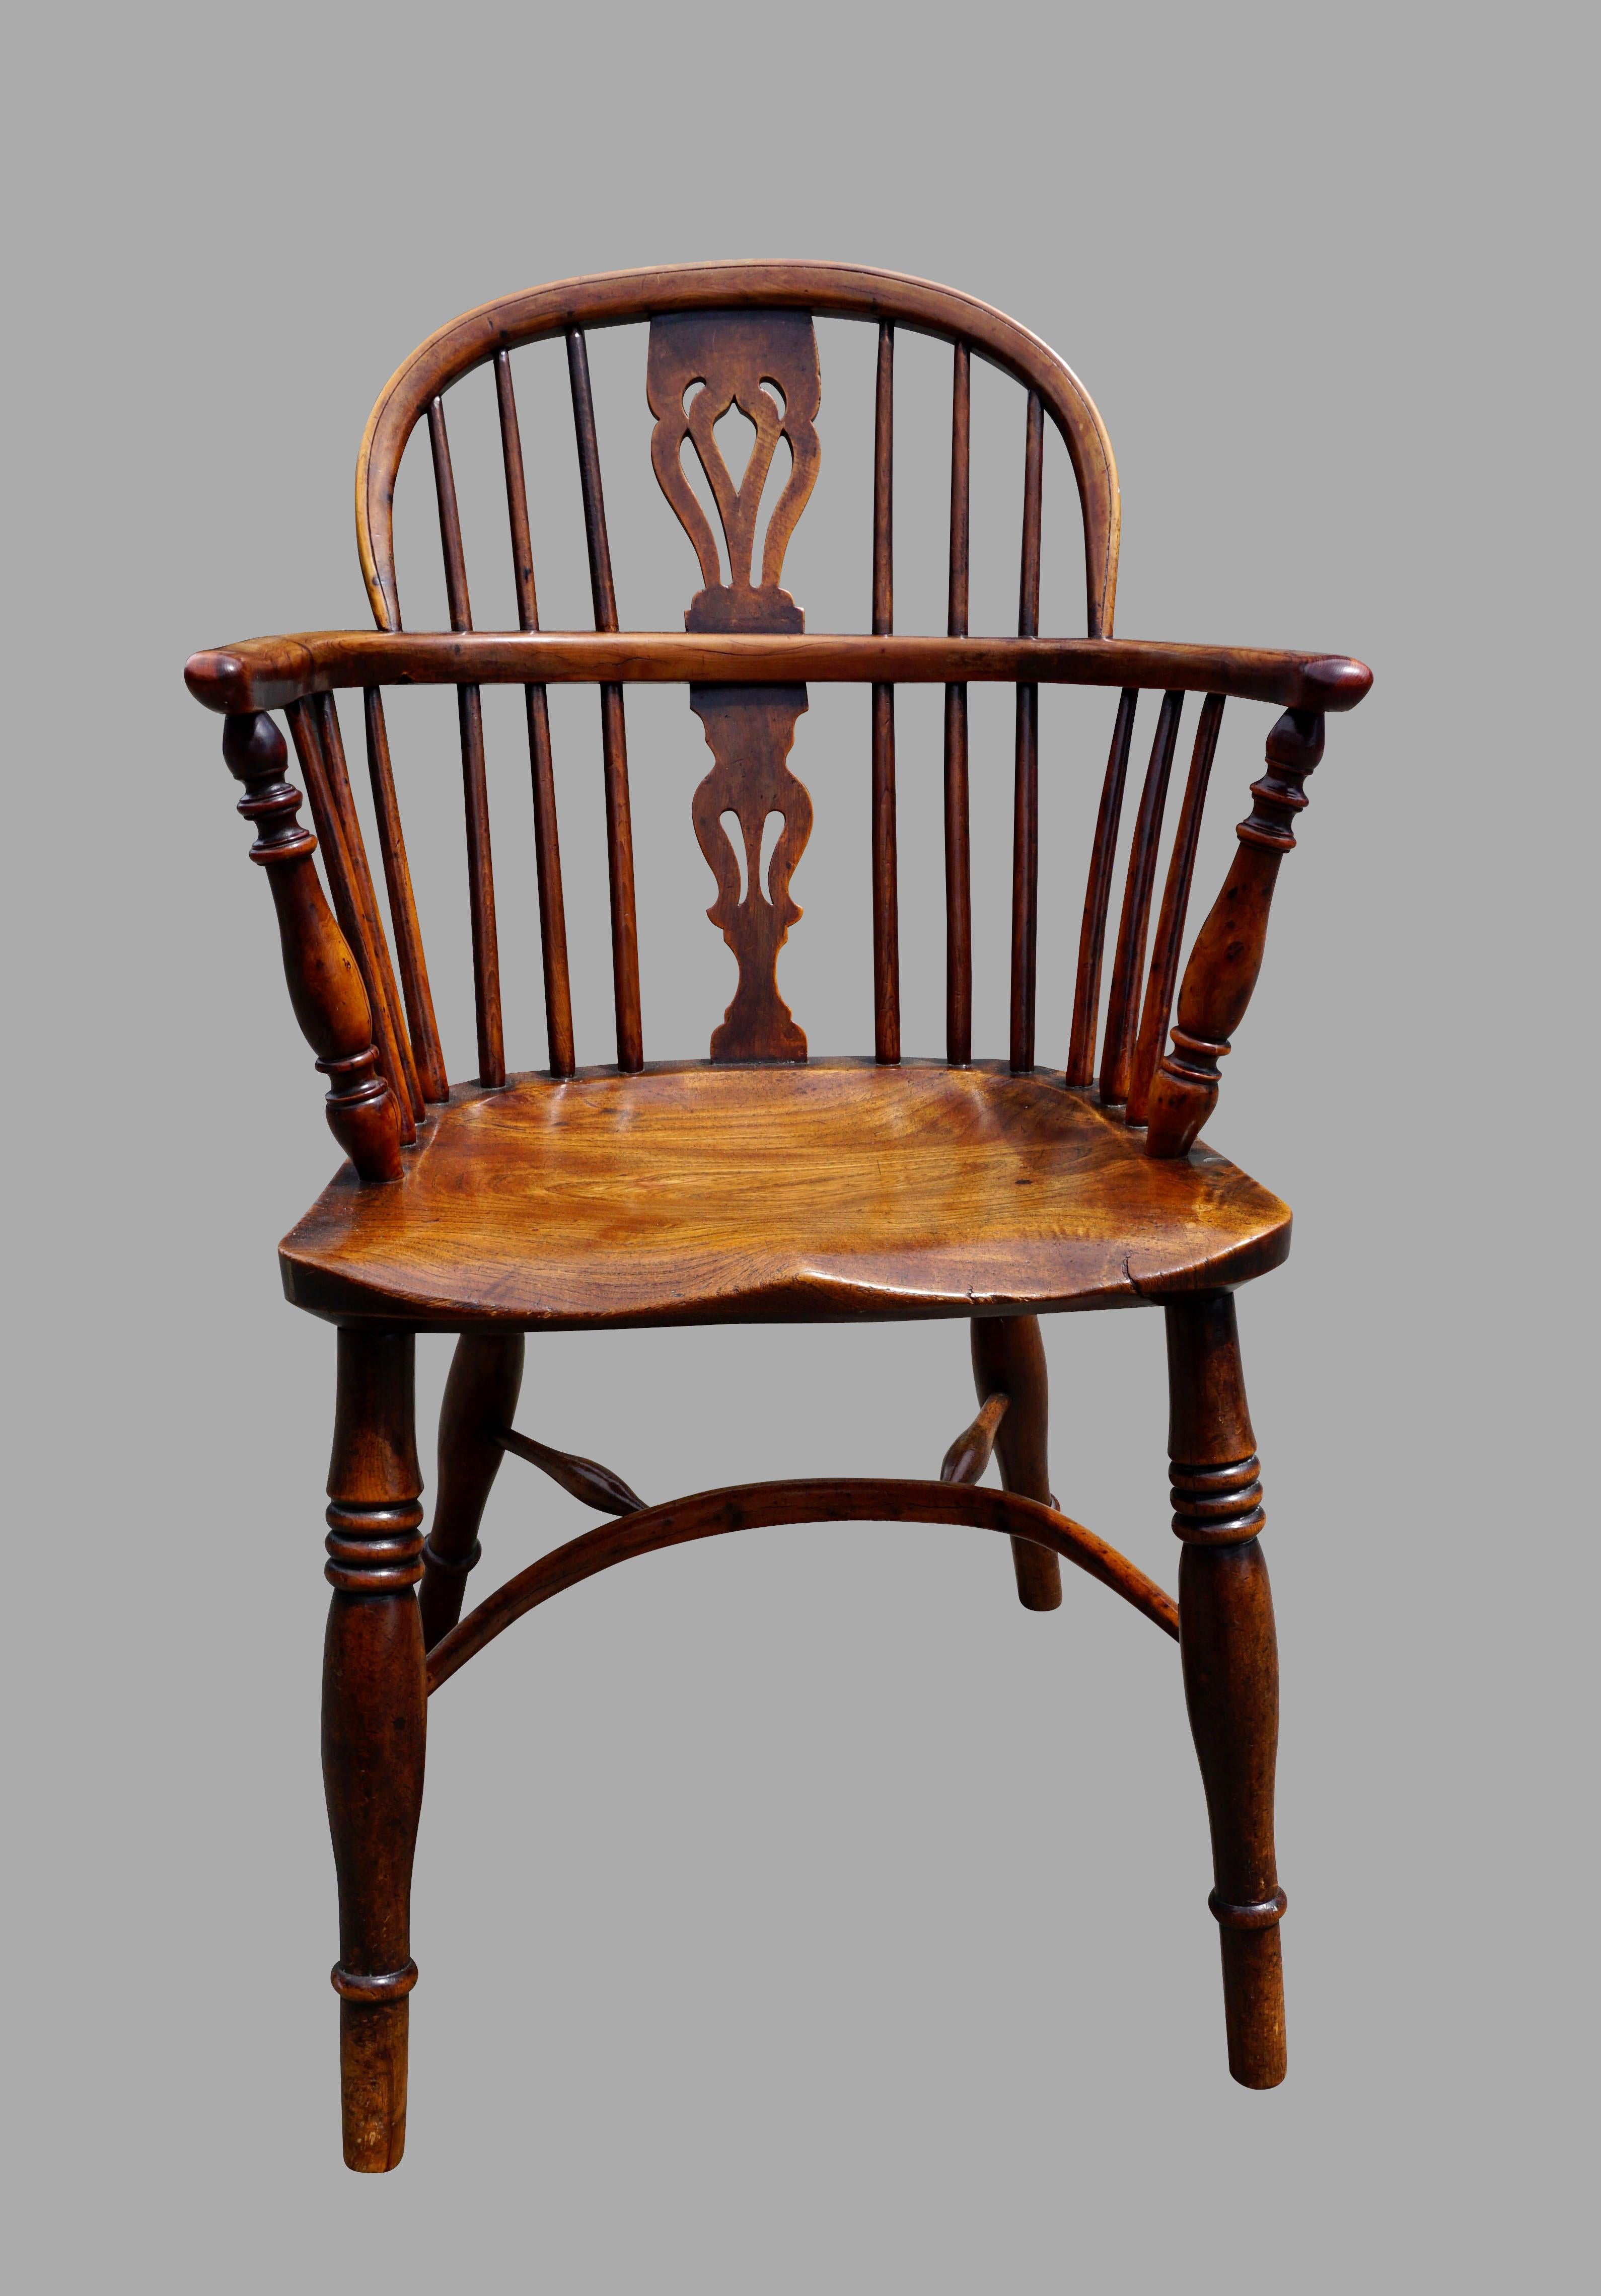 An assembled set of 6 yew wood and hickory low back Windsor arms chairs of typical form, with minor variations in size, each with a pierced splat back, saddle seat and crinoline stretcher. A hard to find set in yew wood, these chairs sit well and